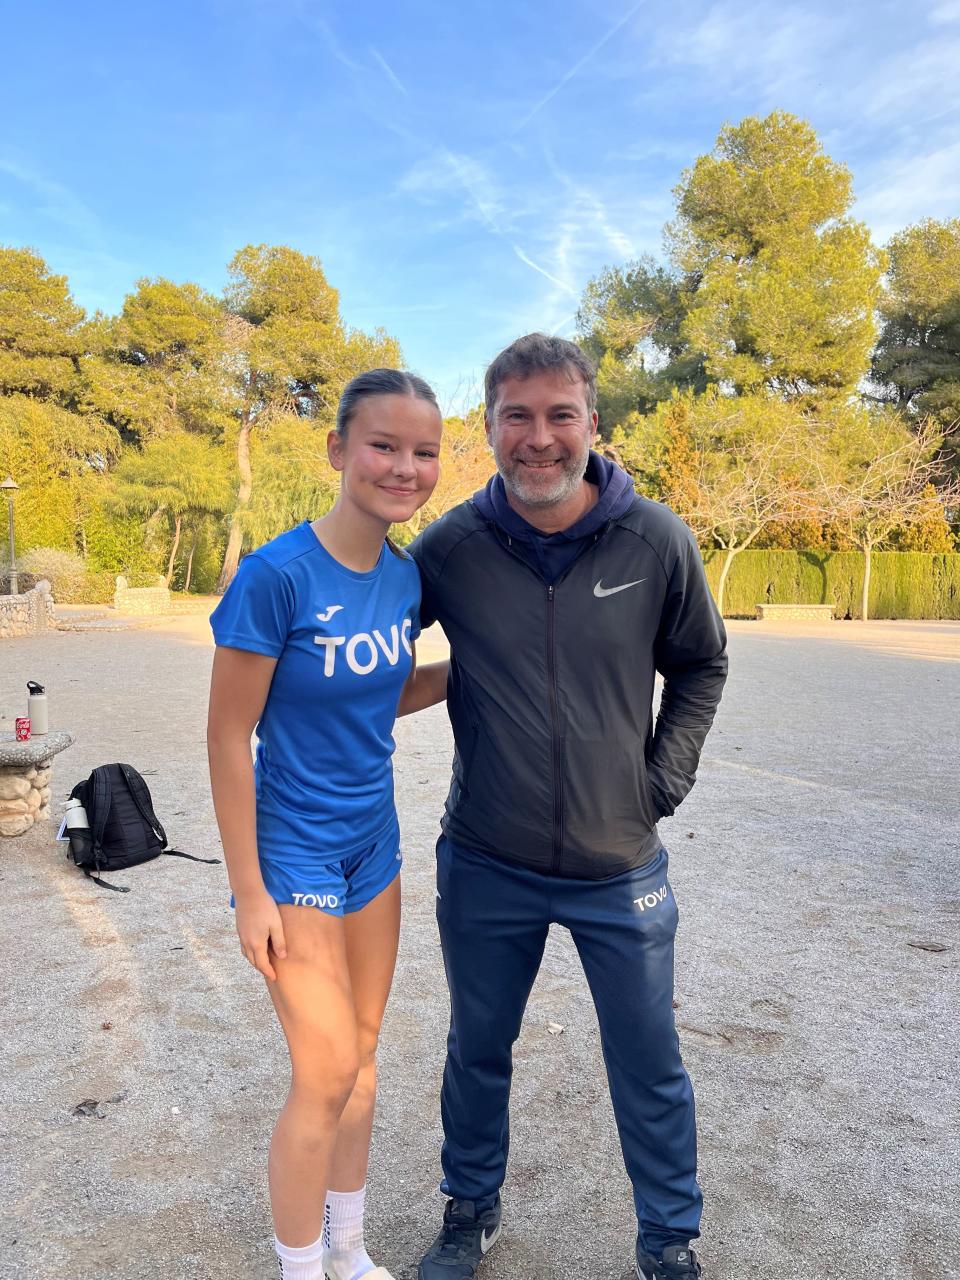 Leah Schamberg poses with Oscar Jorquera, one of her soccer coaches at the TOVO Academy in Spain.